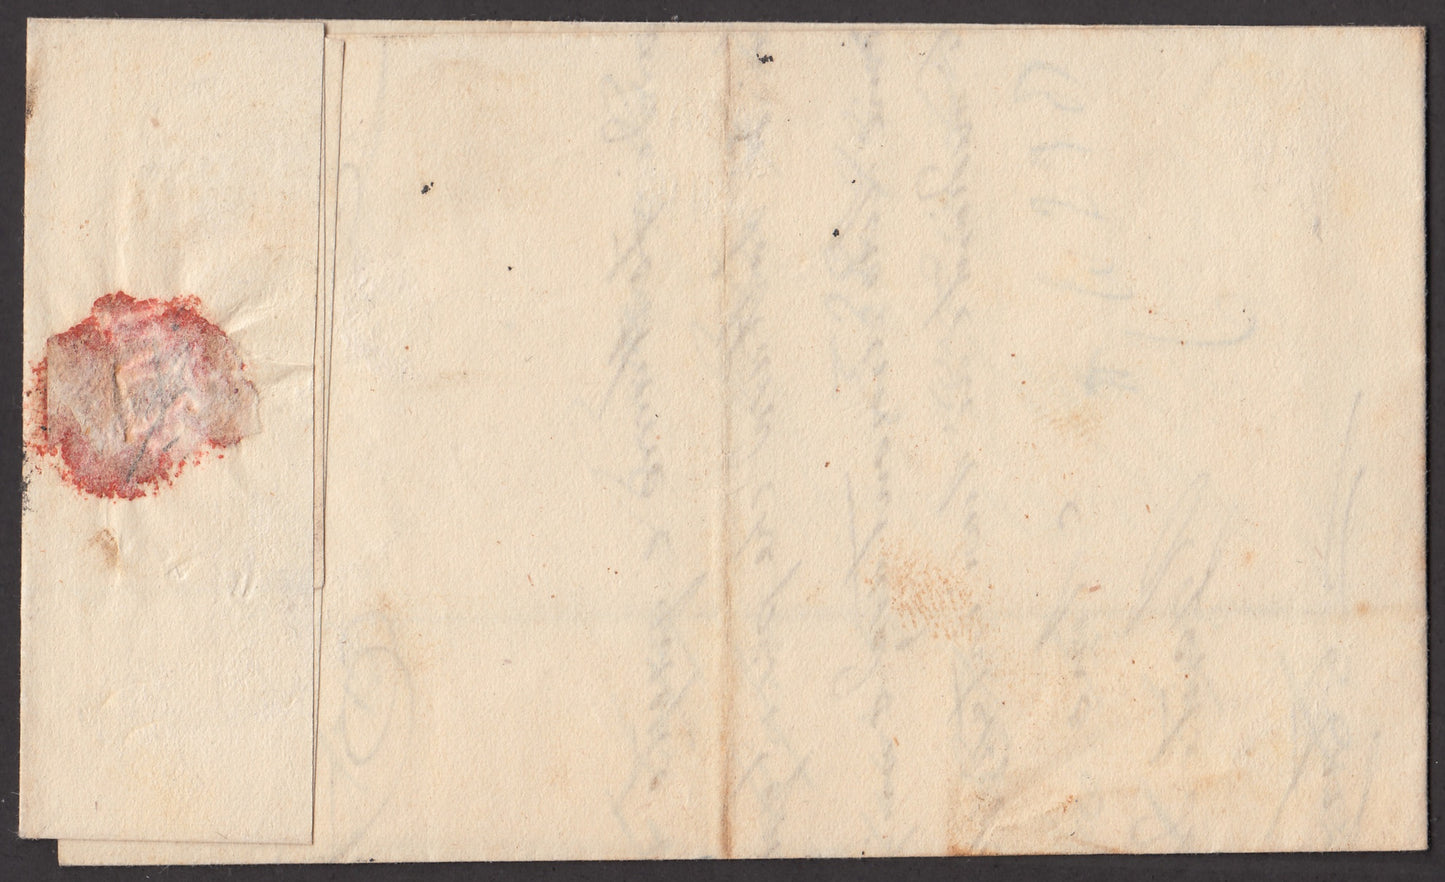 BA23-152 1856 - Letter sent from Forlì to Pesaro 13/8/56 franked with 4 light brown baj (5).